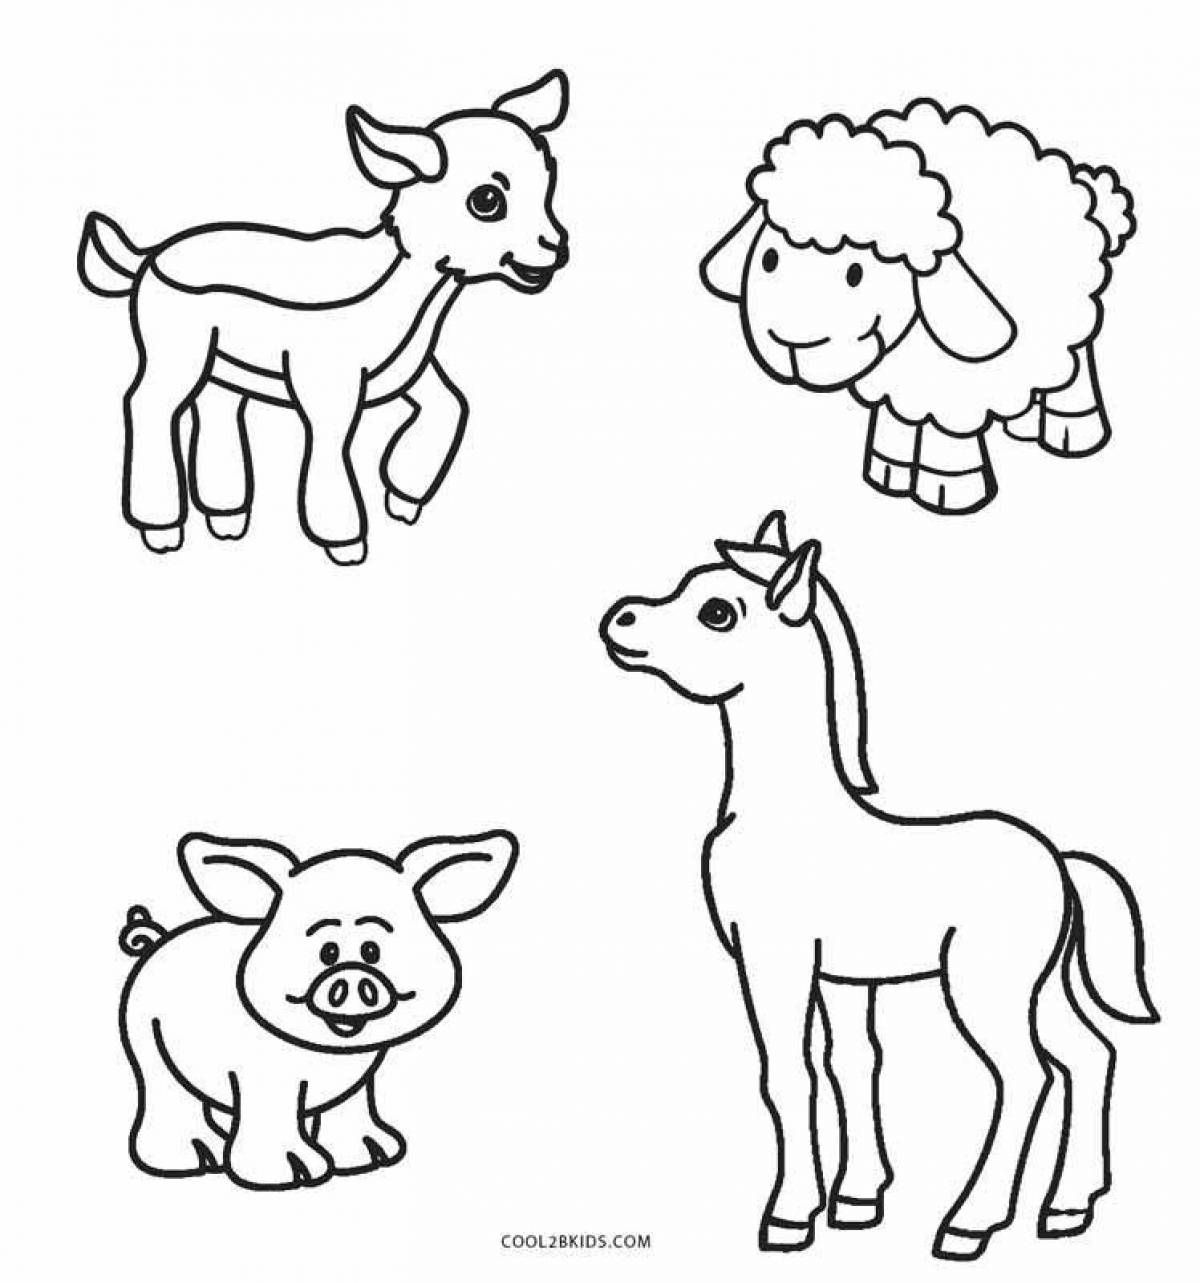 Amazing wild animal coloring page